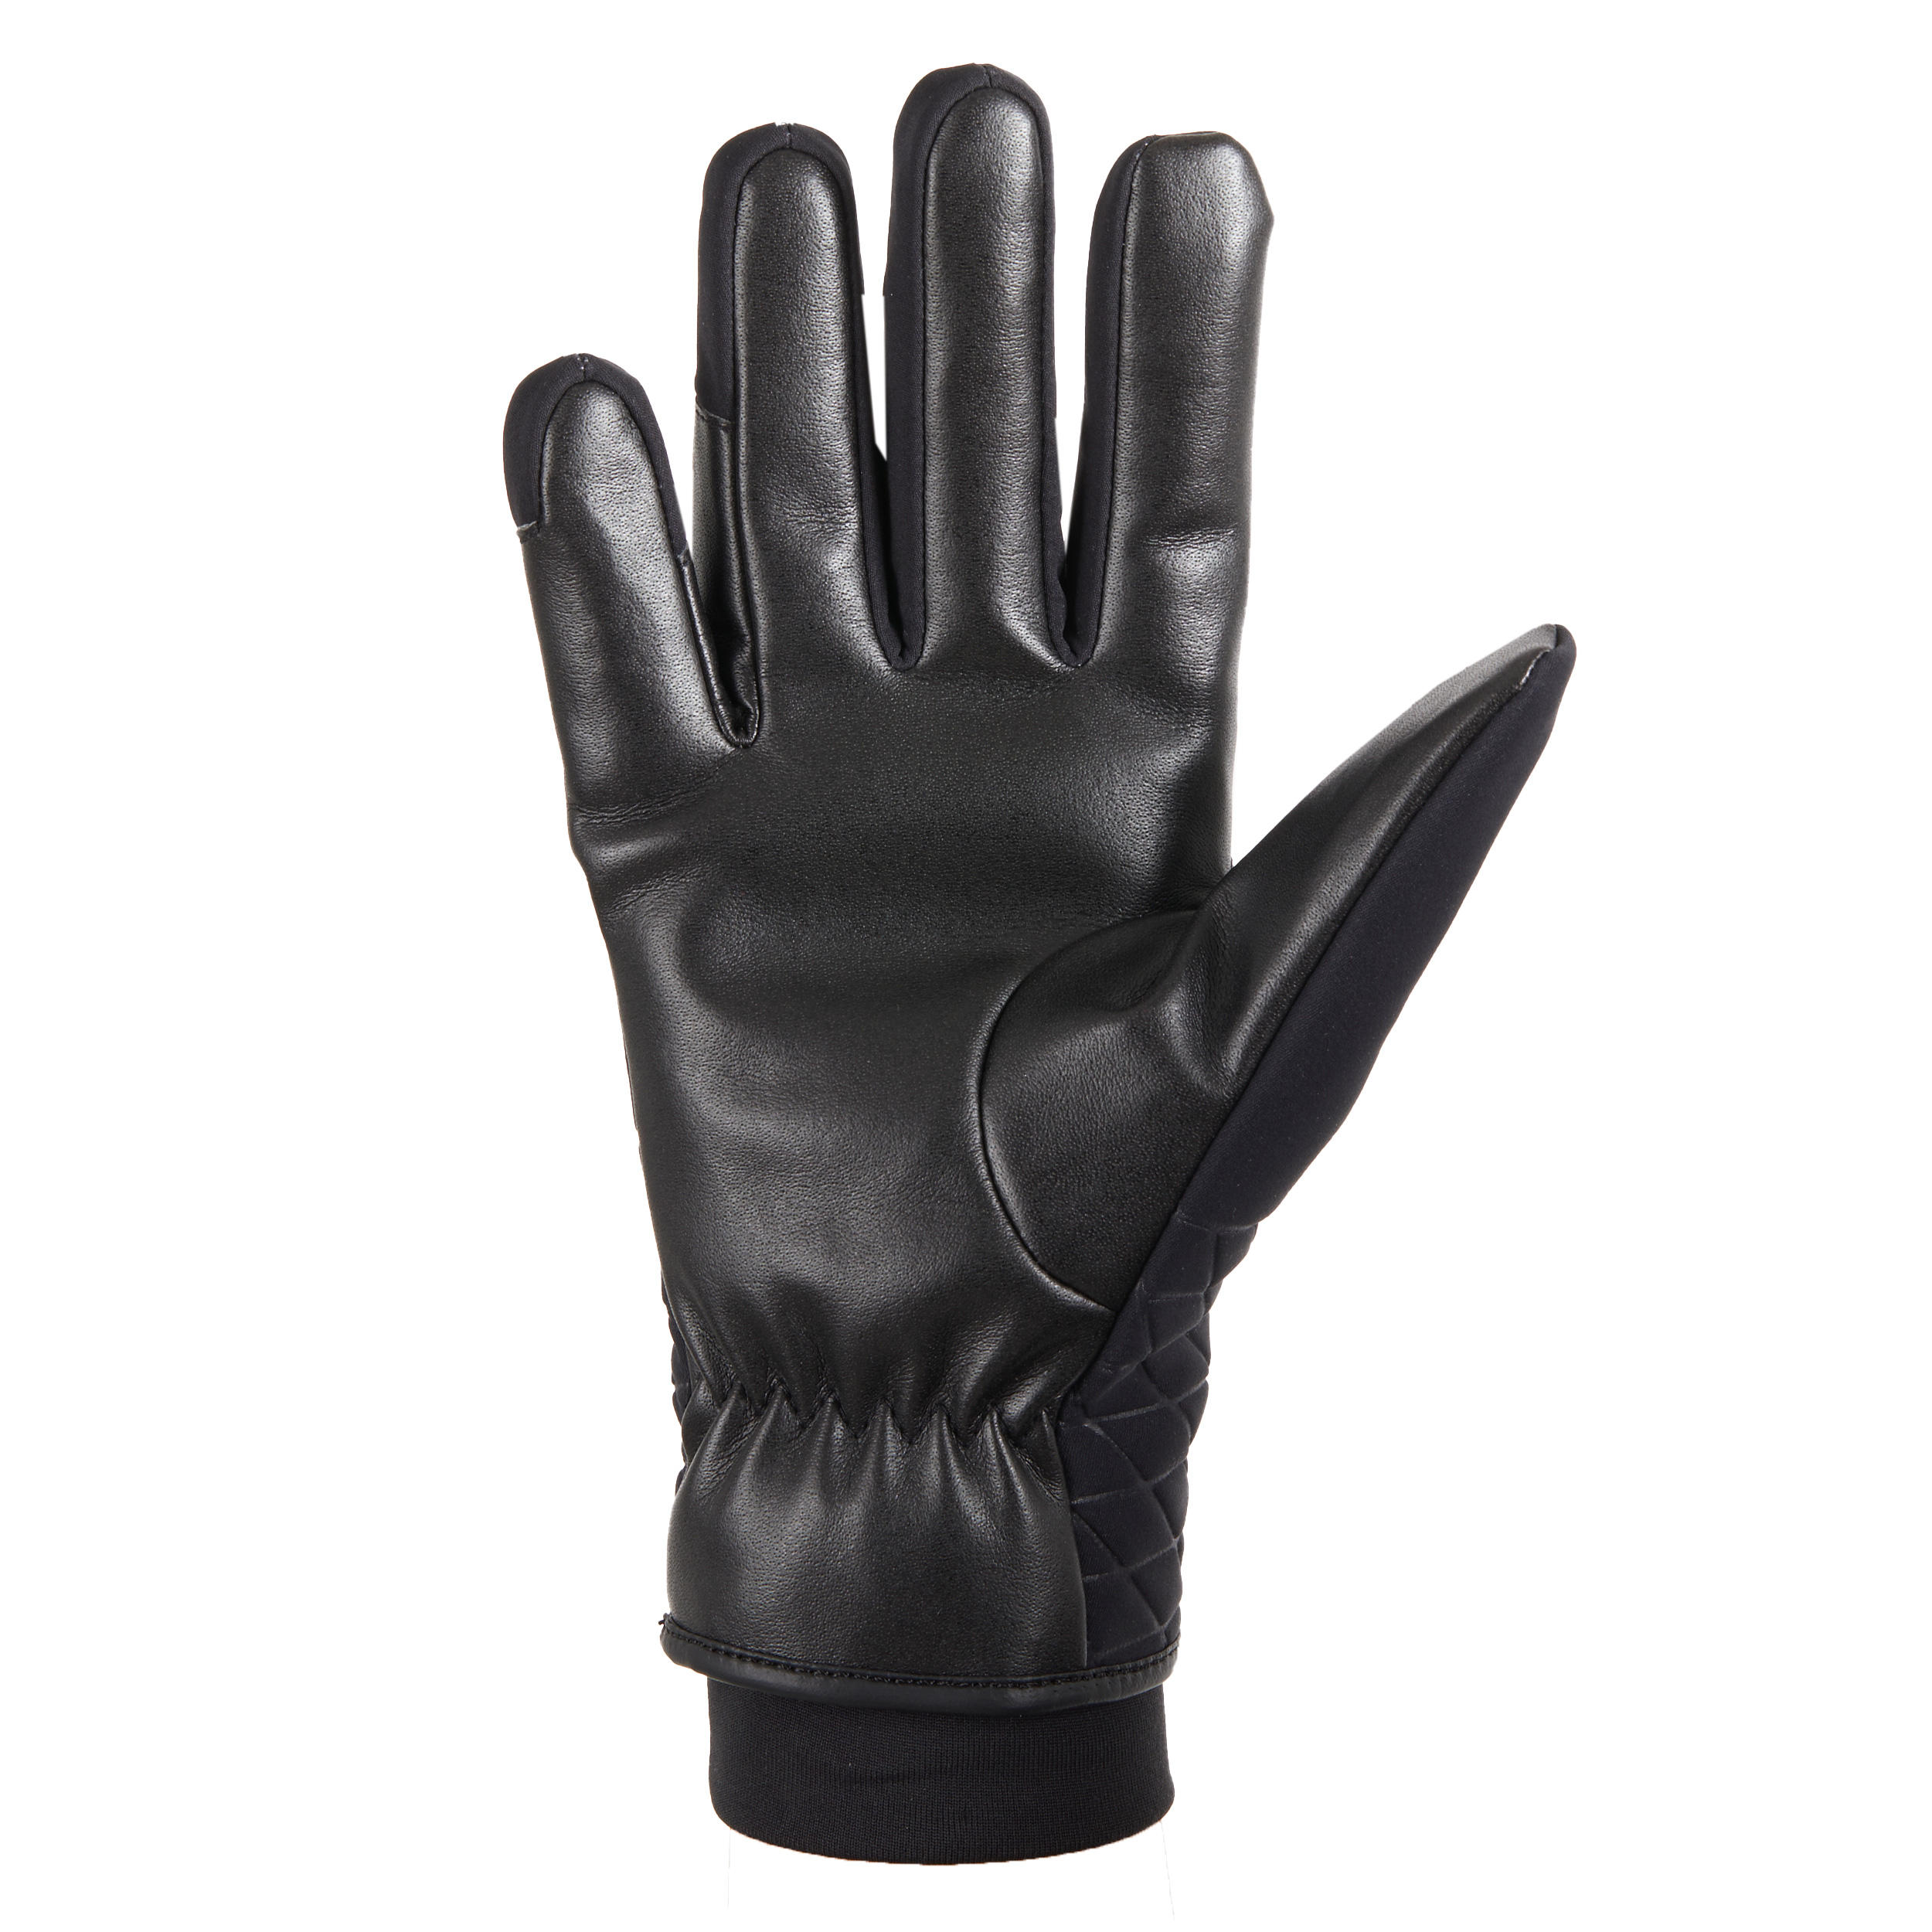 Women's Warm and Waterproof Horse Riding Gloves 900 Warm - Black 2/5